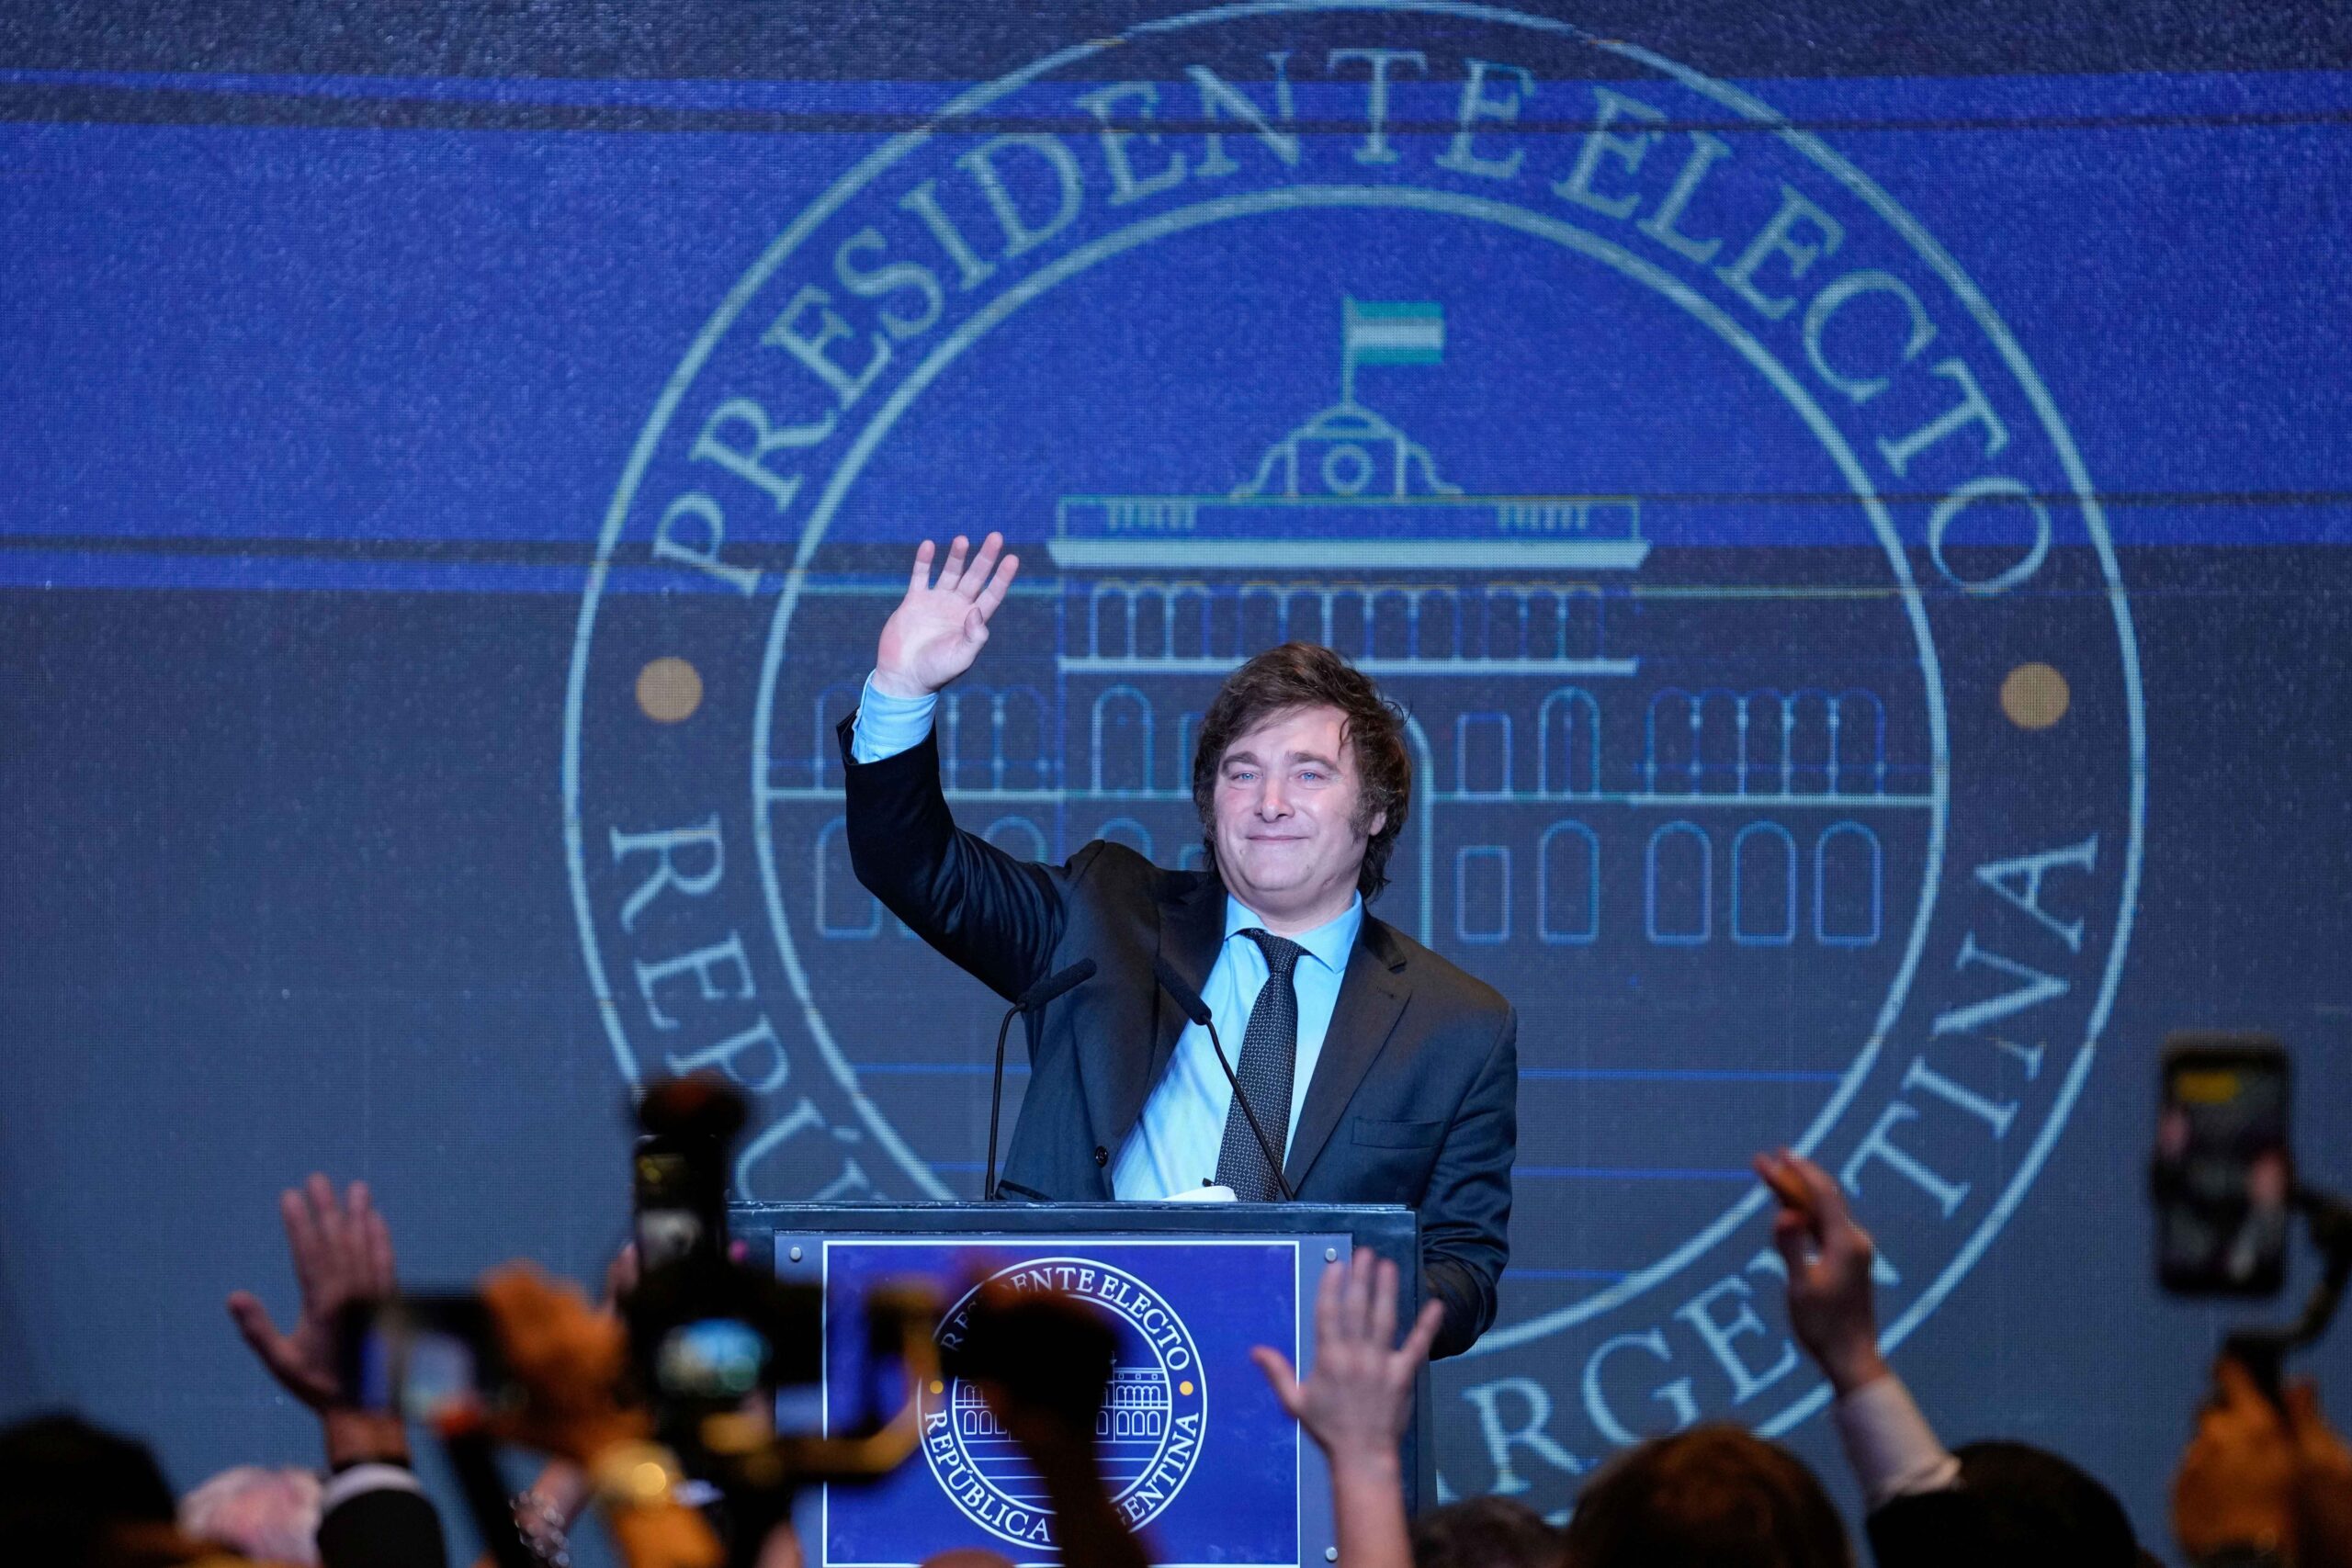 The stock market in Argentina saw a major boost after the electoral victory of libertarian “anarcho-capitalist” Javier Milei, promising an economic turnaround.